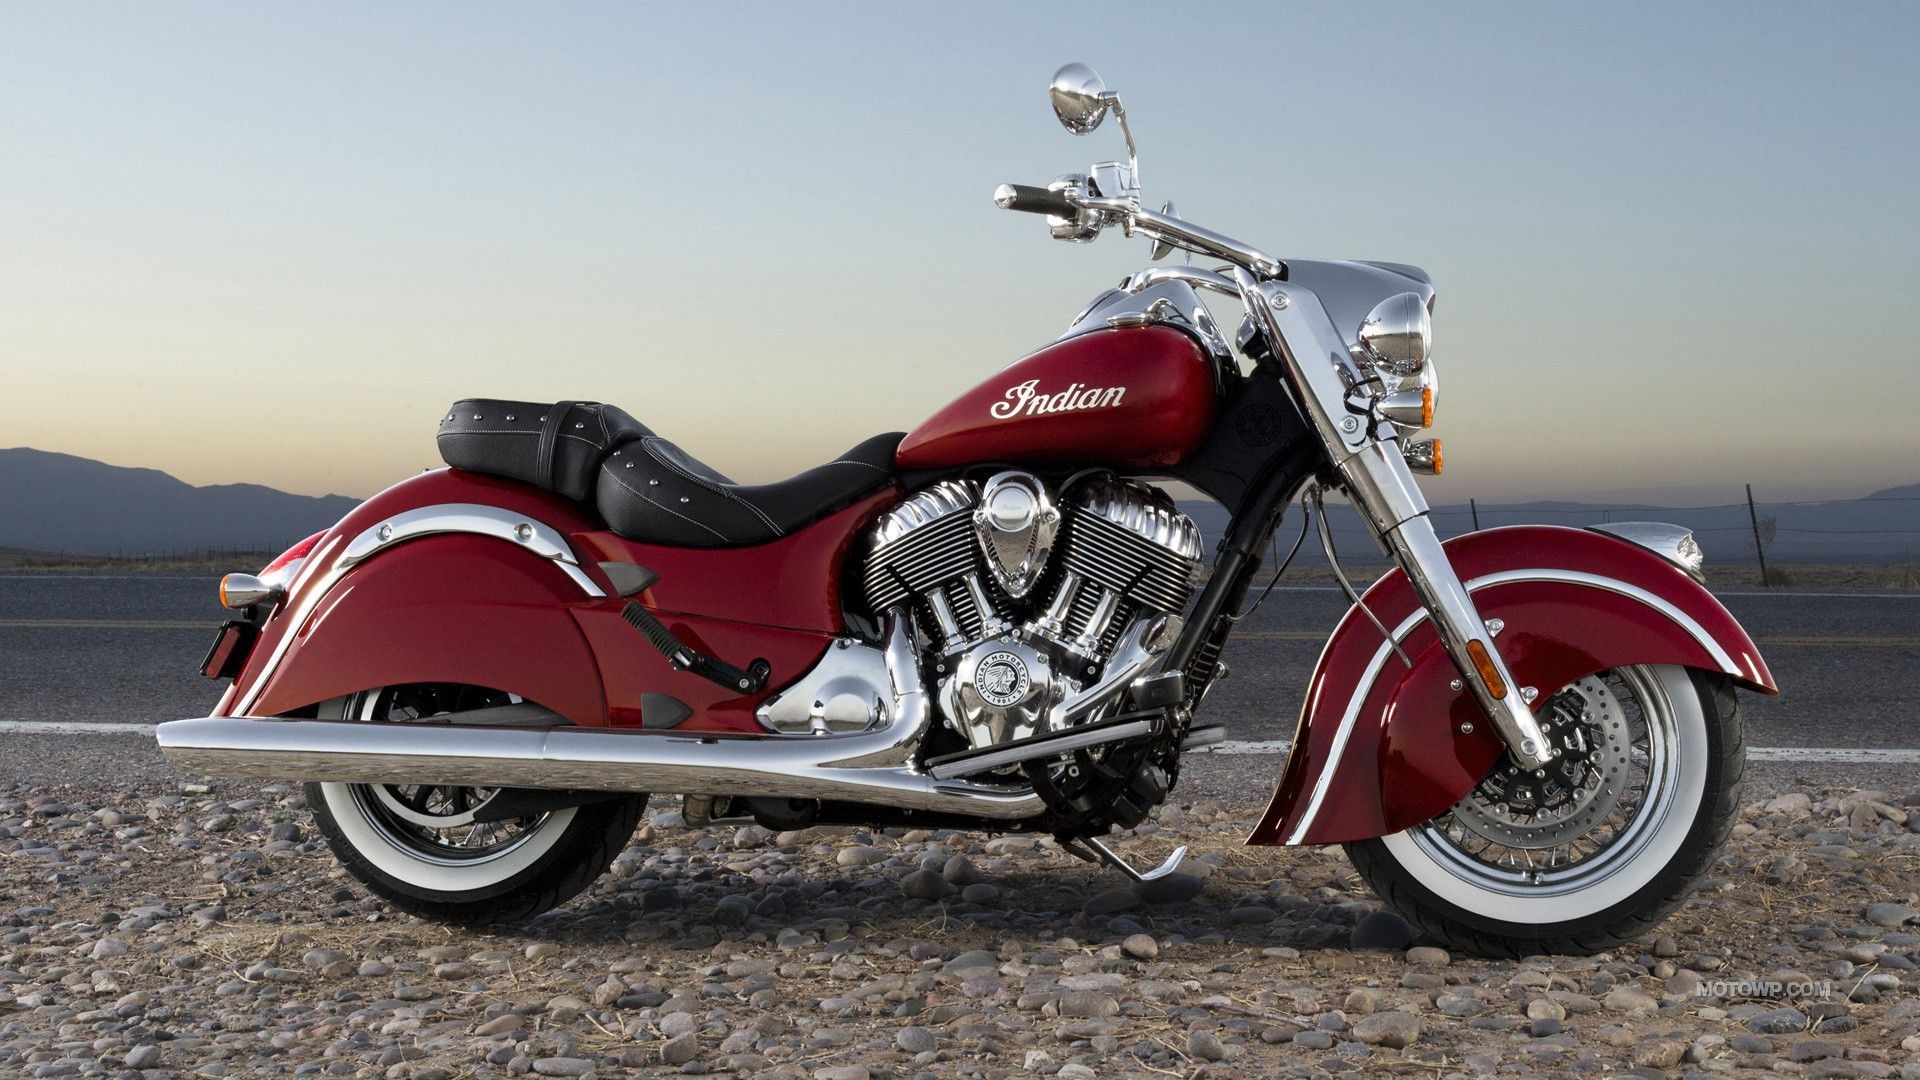 1920x1080 2014 Indian Motorcycle Wallpaper Hd Background 8 HD Wallpapers .